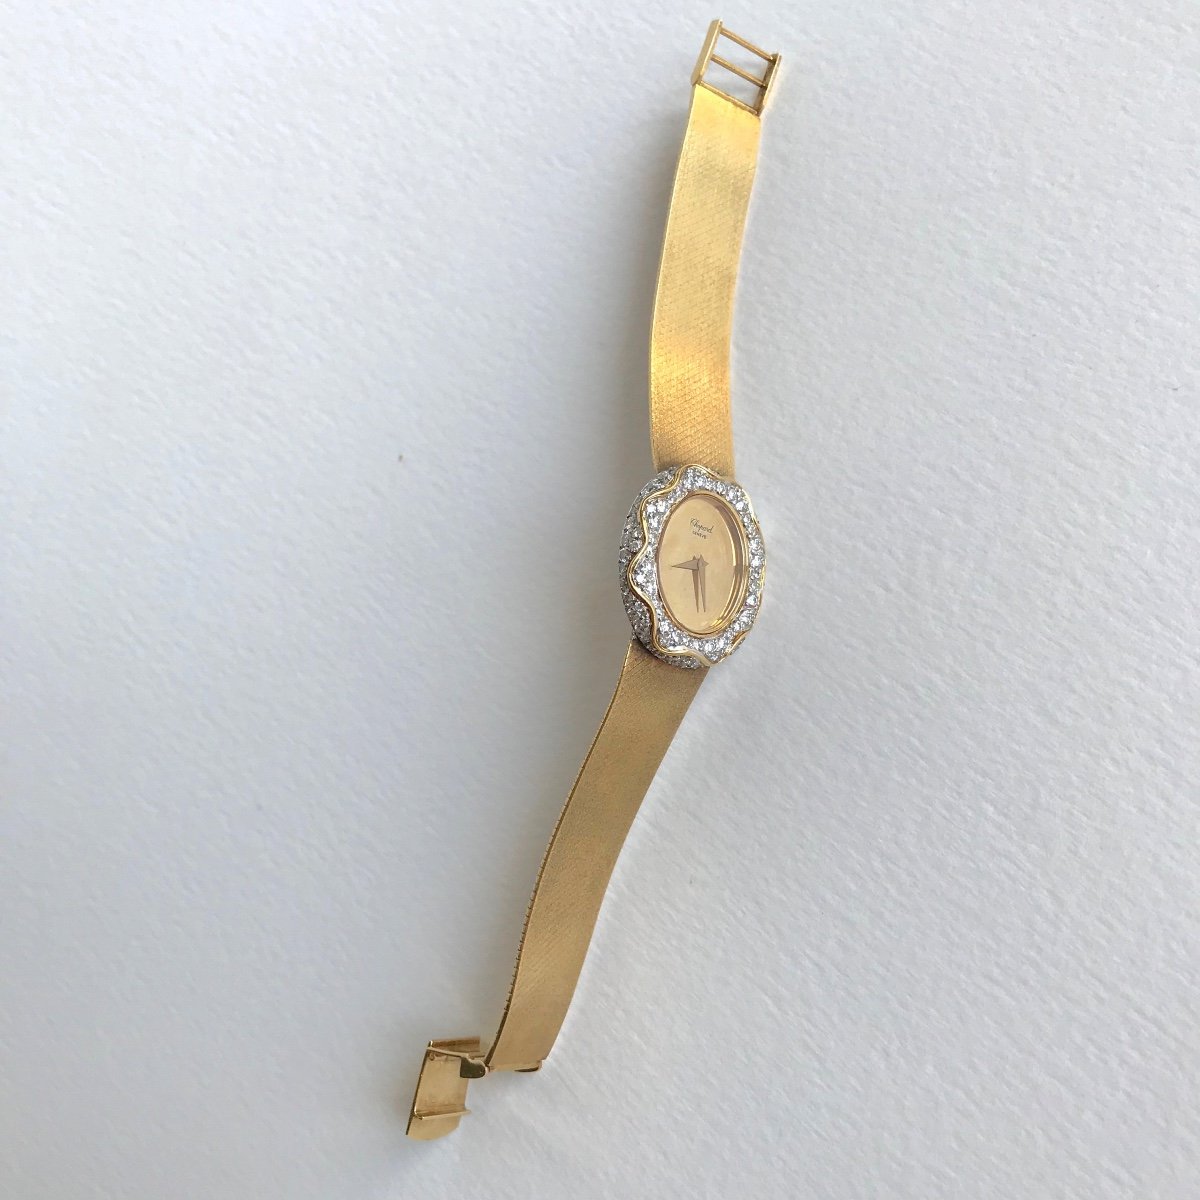 Chopard 1960 Watch In 18k Yellow Gold And Diamonds-photo-5